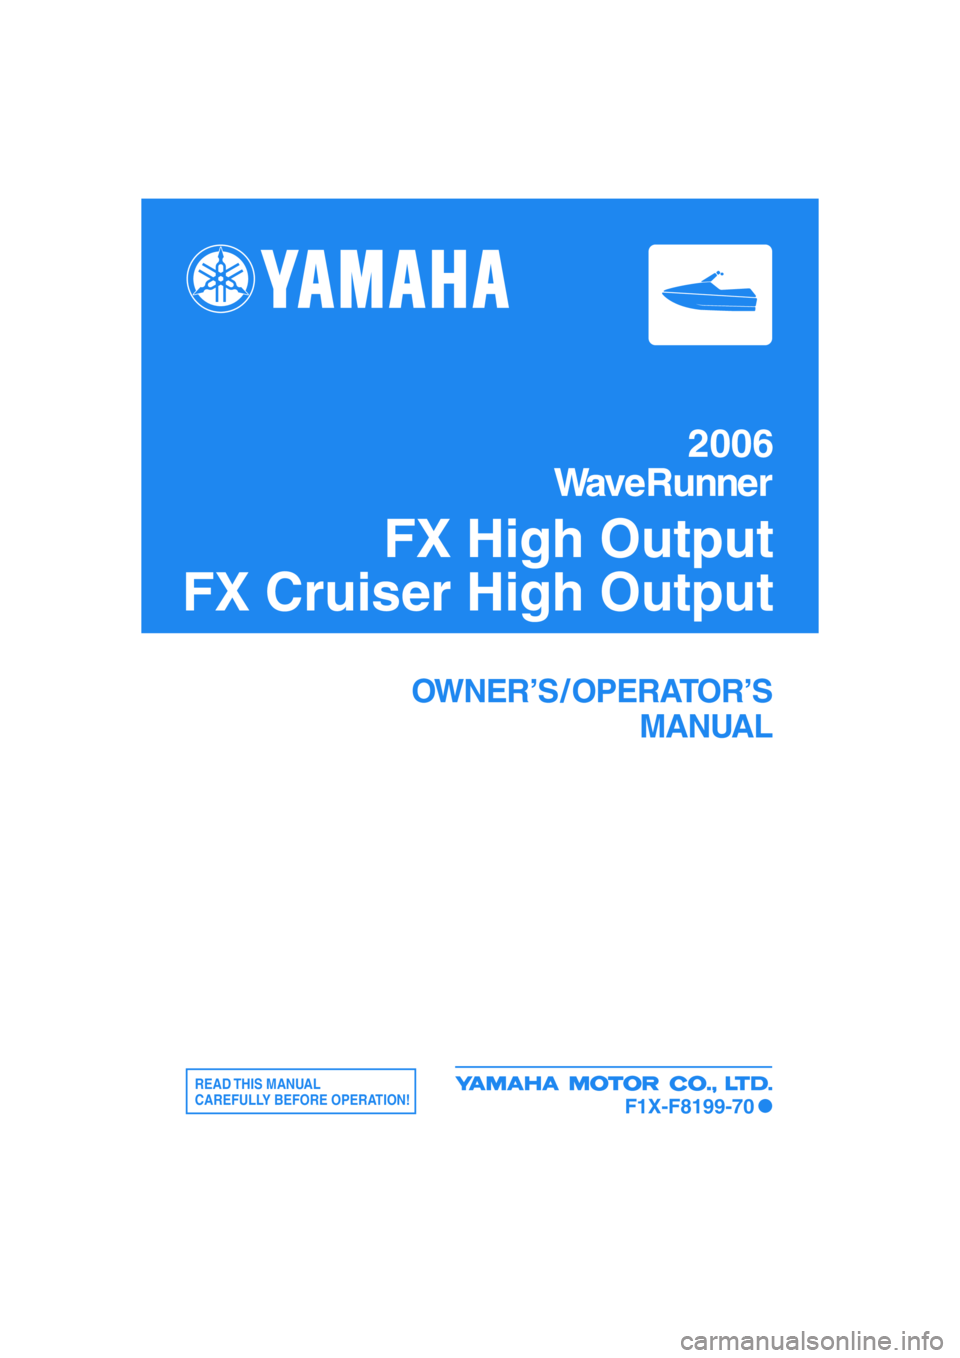 YAMAHA FX HO 2006  Owners Manual 2006
WaveRunner
FX High Output
FX Cruiser High Output
OWNER’S / OPERATOR’S
MANUAL
READ THIS  MANUAL
CAREFULLY BEFORE OPERATION!
F1X-F8199-70 